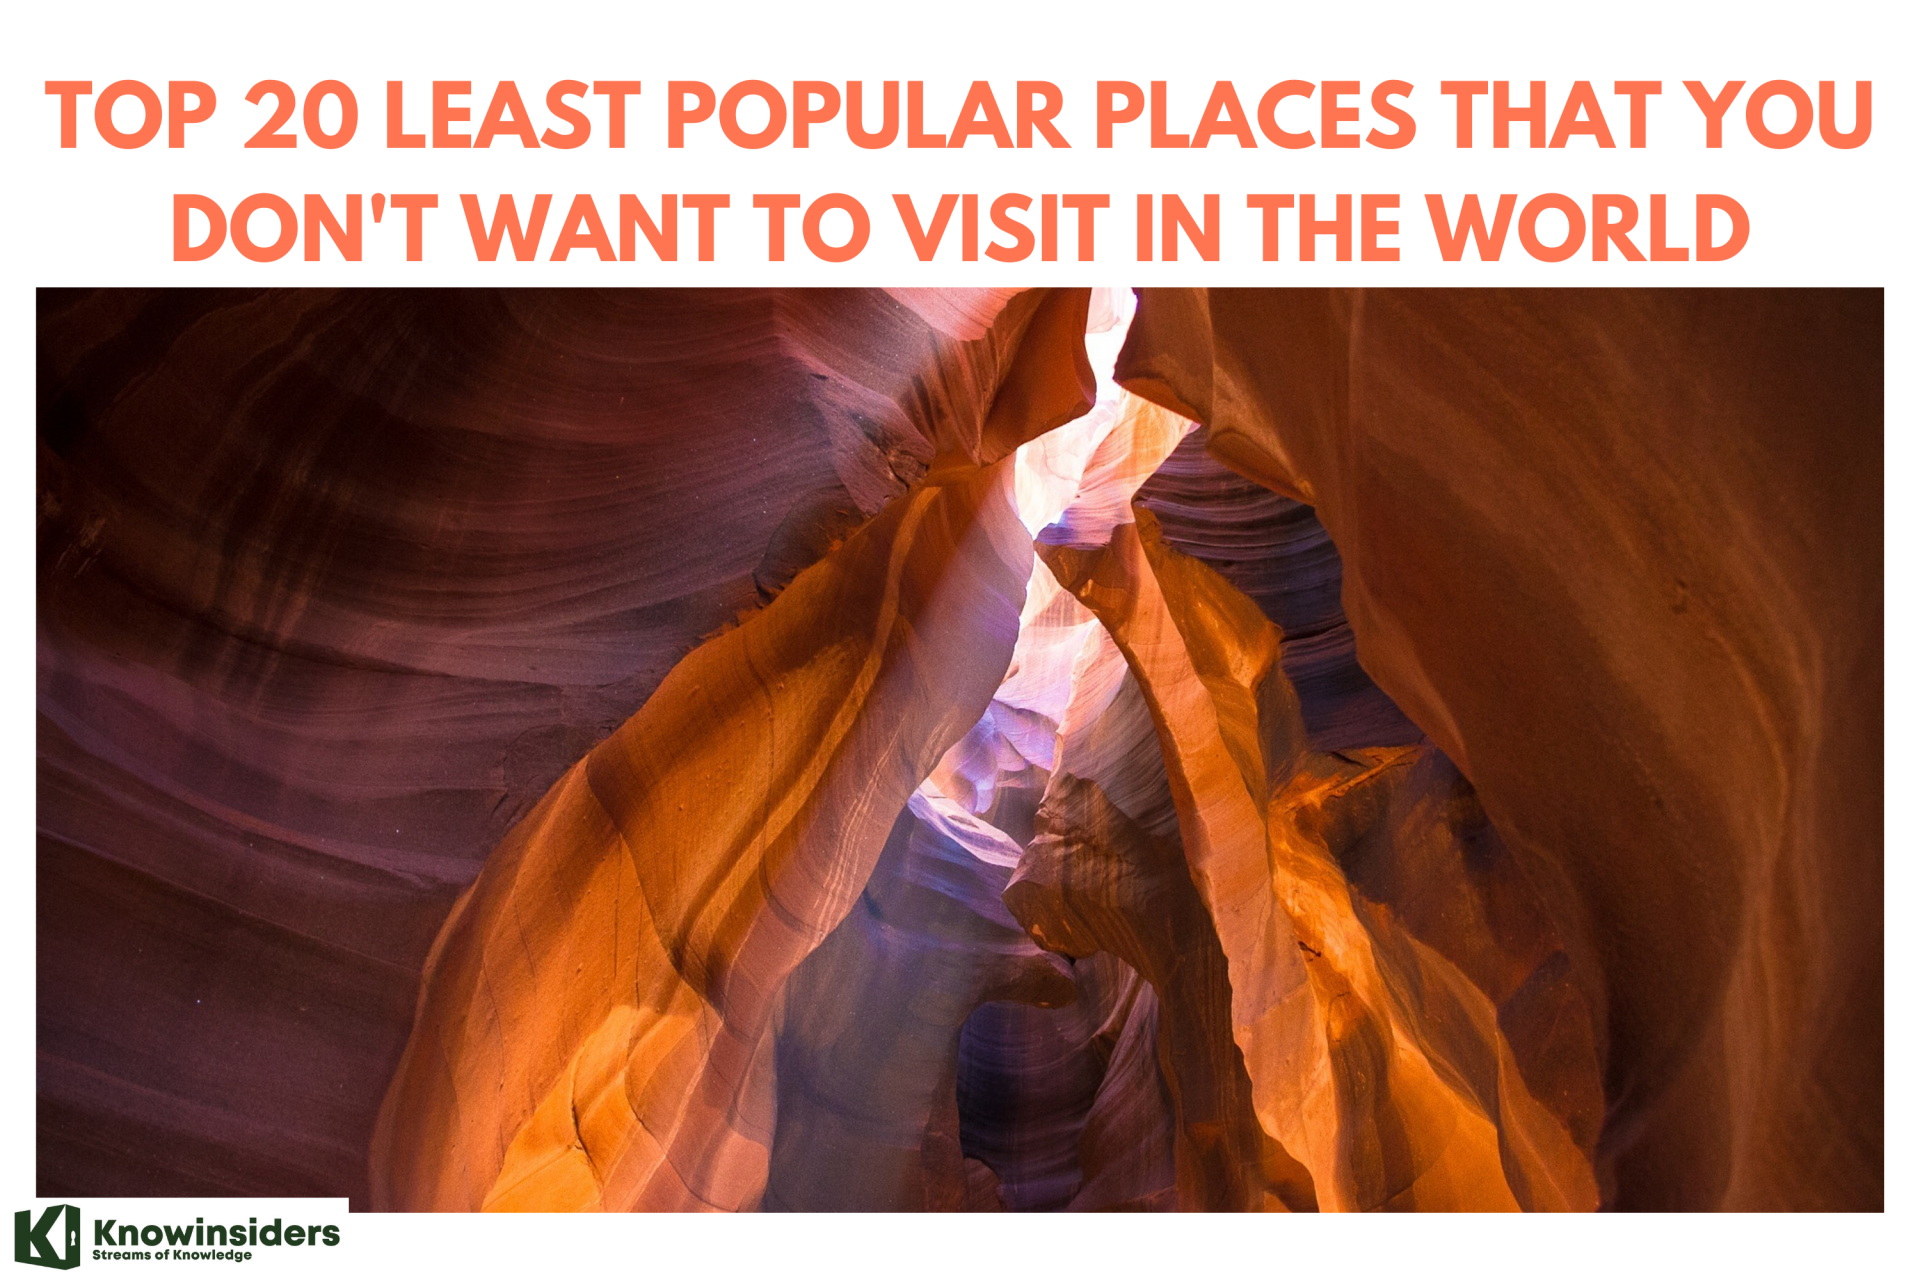 Top 20 Least Popular Places That You Don't Want to Visit in The World